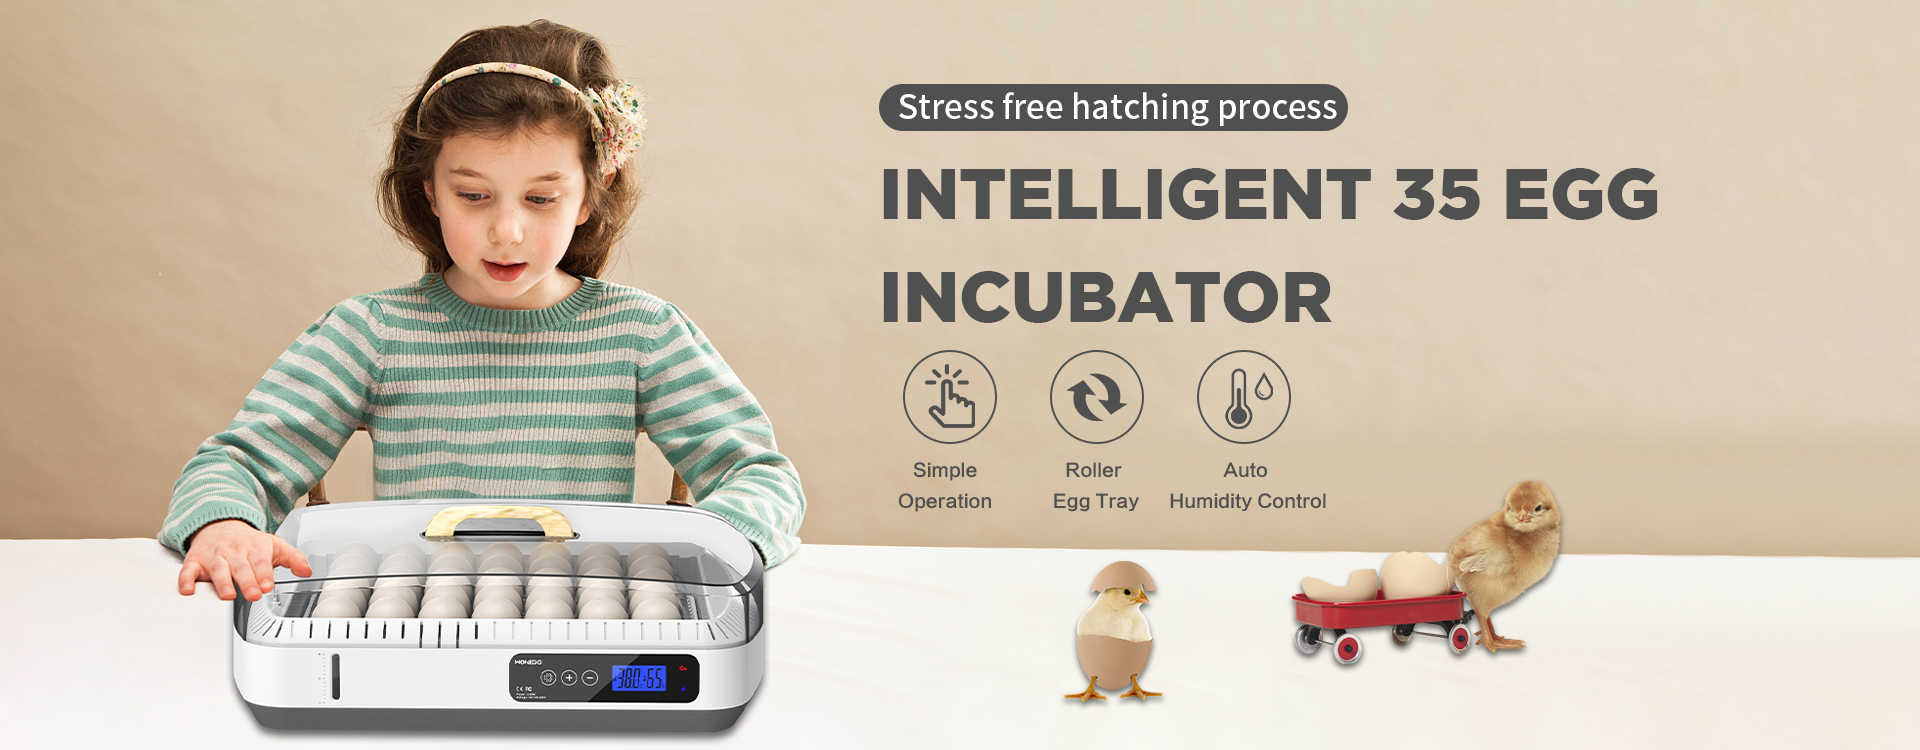 https://www.incubatoregg.com/wonegg-automatic-humidity-control-roller-egg-tray-for-35-eggs-incubator-product/